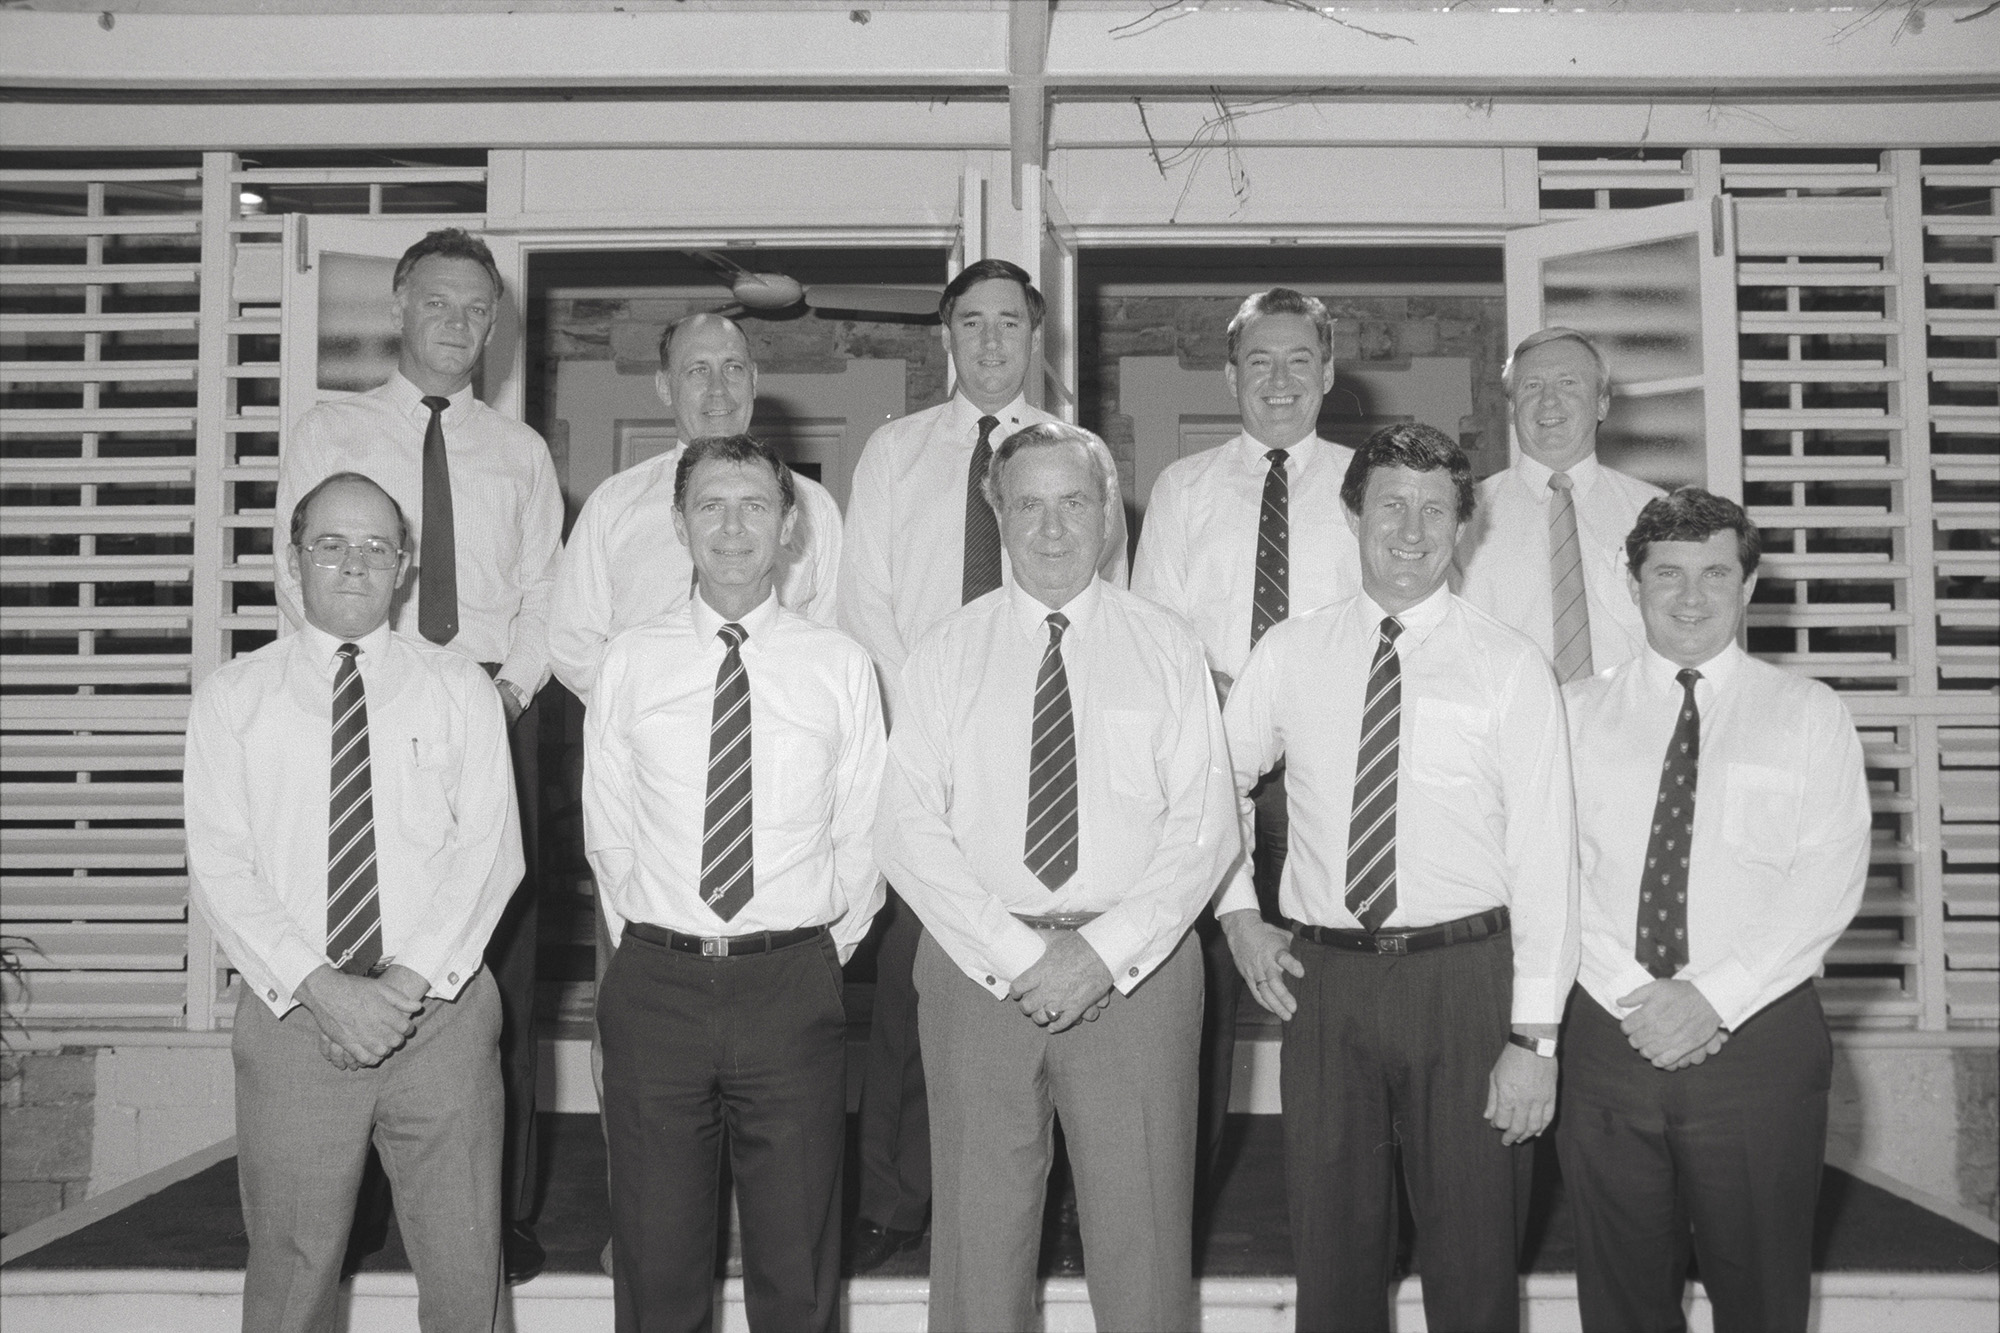 Back row: Hon Steve Hatton MLA, Hon Max Ortmann MLA, Hon Mike Reed MLA, Hon Daryl Manzie MLA, Hon Fred Finch MLA<br />Front row: Hon Roger Vale MLA, Hon Marshall Perron MLA, Administrator Hon Justice James Muirhead AC, Hon Barry Coulter MLA, Hon Shane Stone, MLA.<br />Image courtesy of Library & Archives NT, Department of the Chief Minister, NTRS 3823 P1, Box 11, BW2950, Image 18 [Ministers, 13 November 1990]